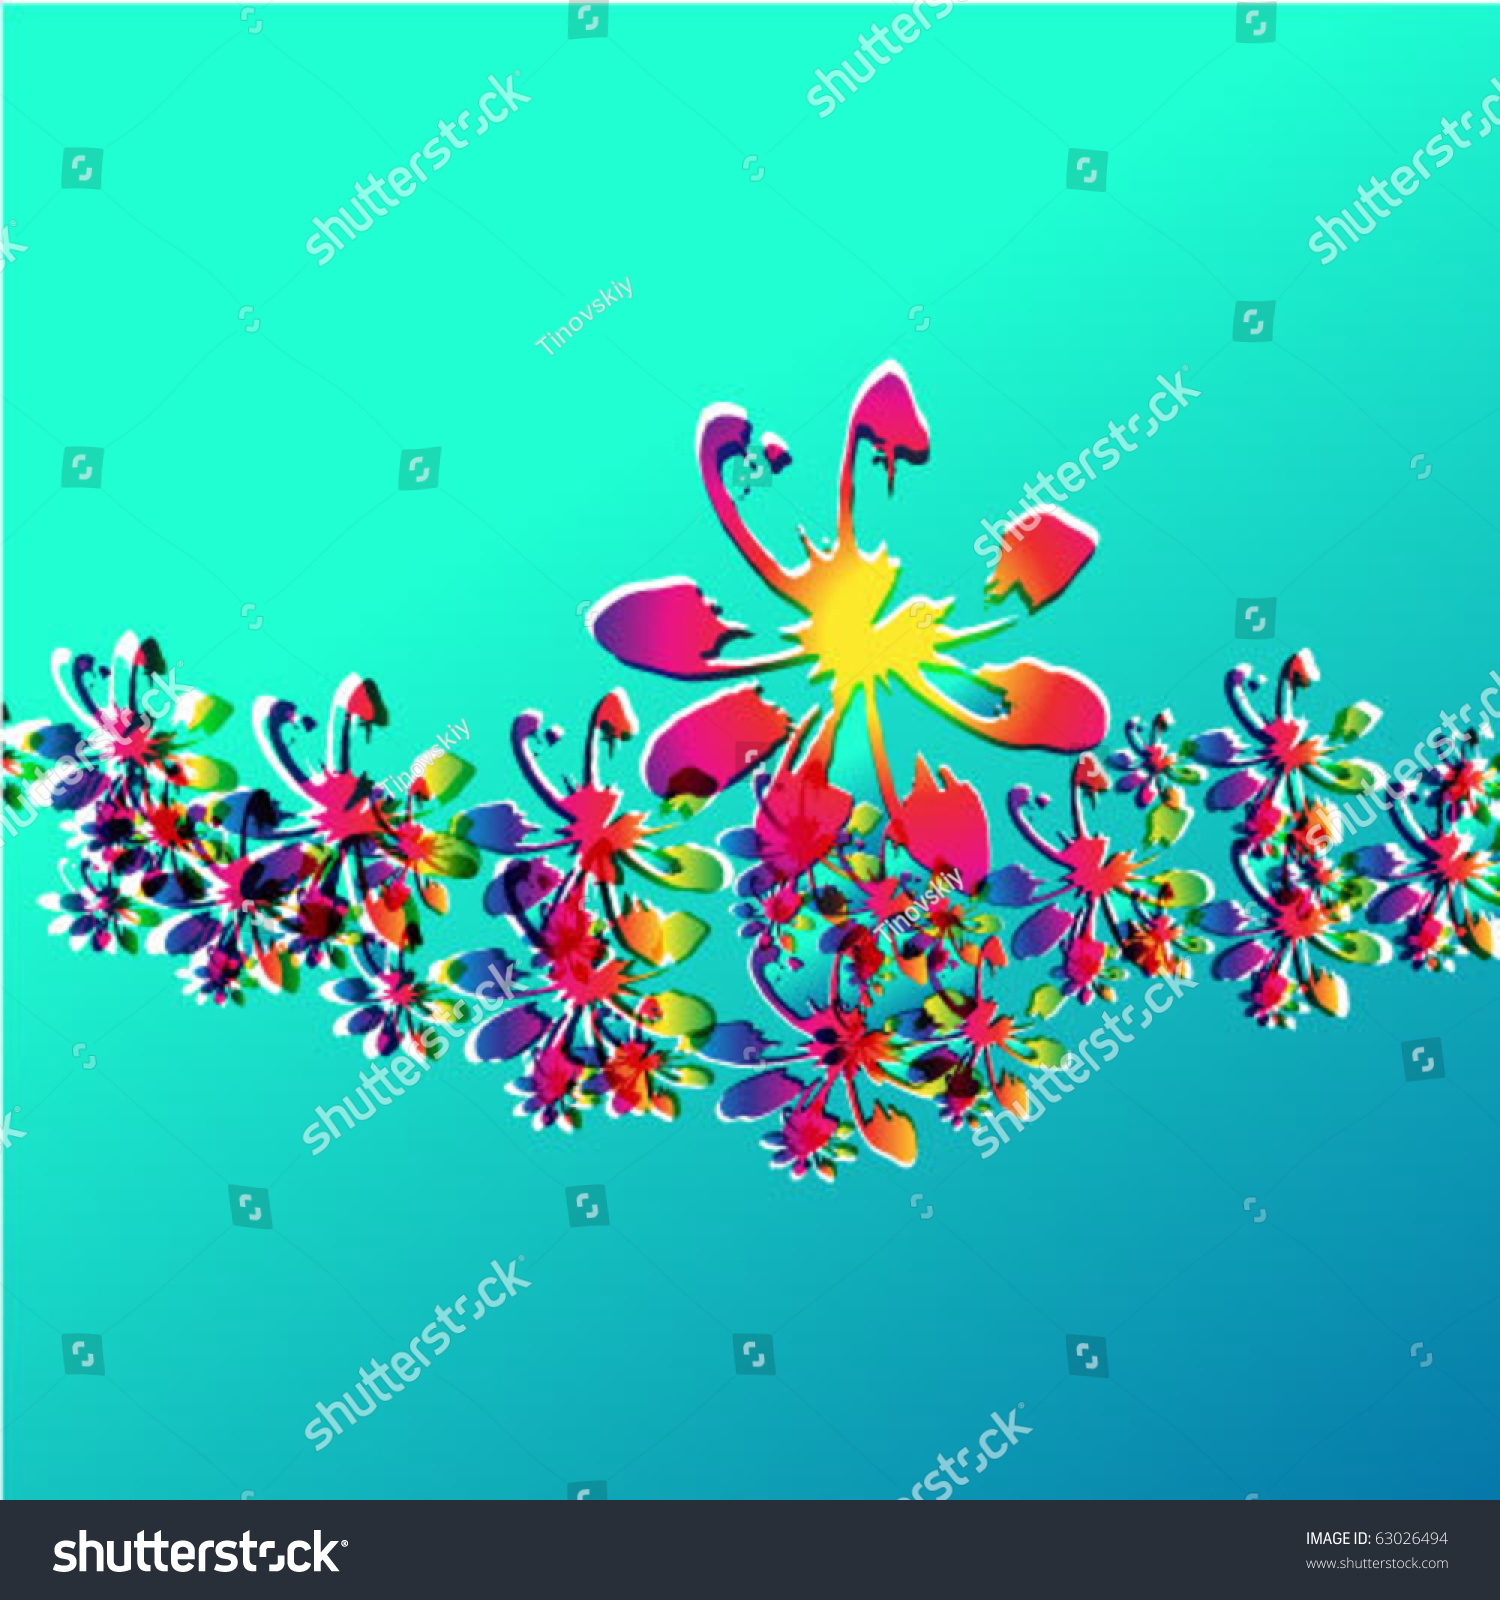 Silhouette Of Surf Flowers With Transparency Effect Eps10 . Tropical